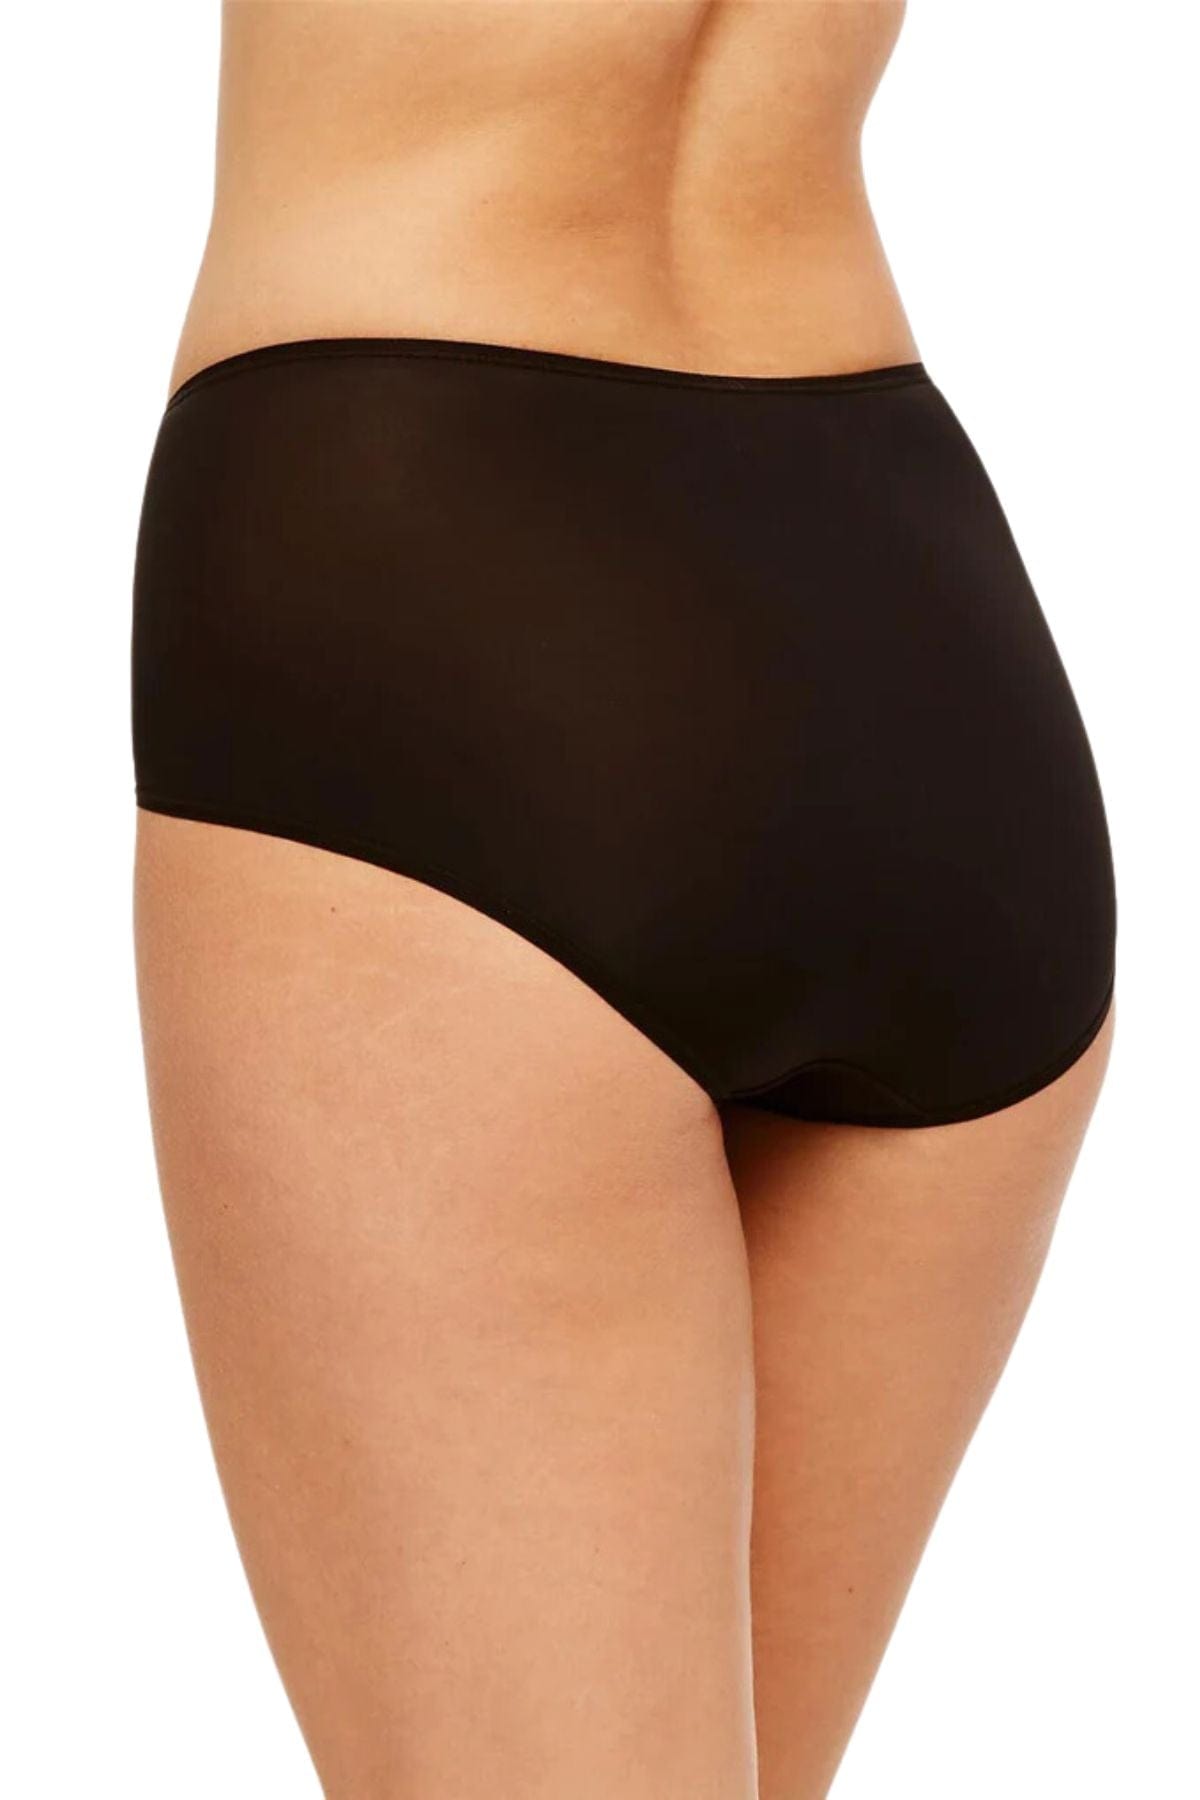 Montelle Lingerie Smoothing Brief - Black